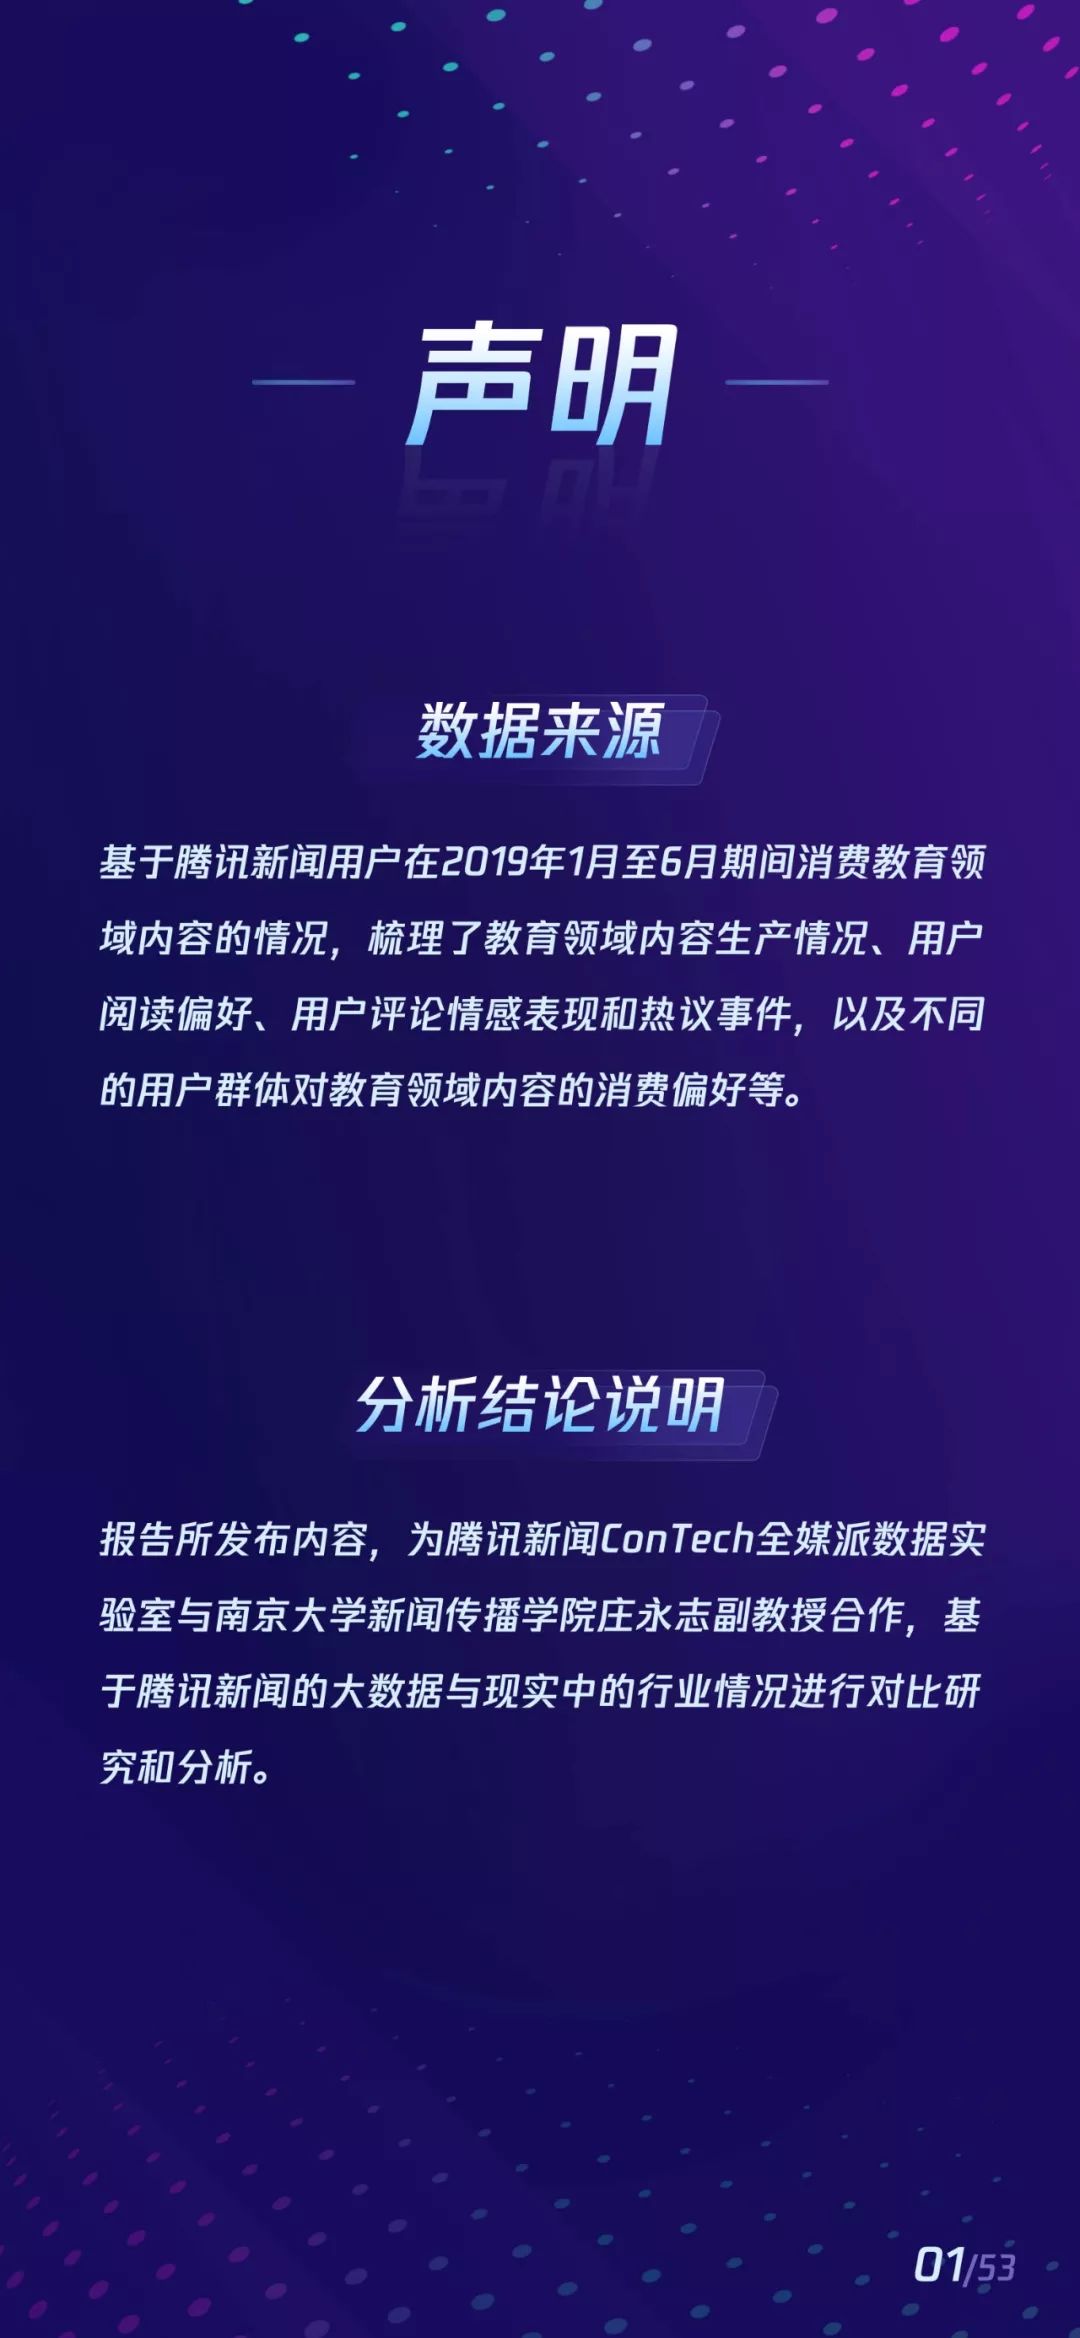 Tencent News ConTech Data Labs Releases 2019 Education New Ecological Content Dissemination Report